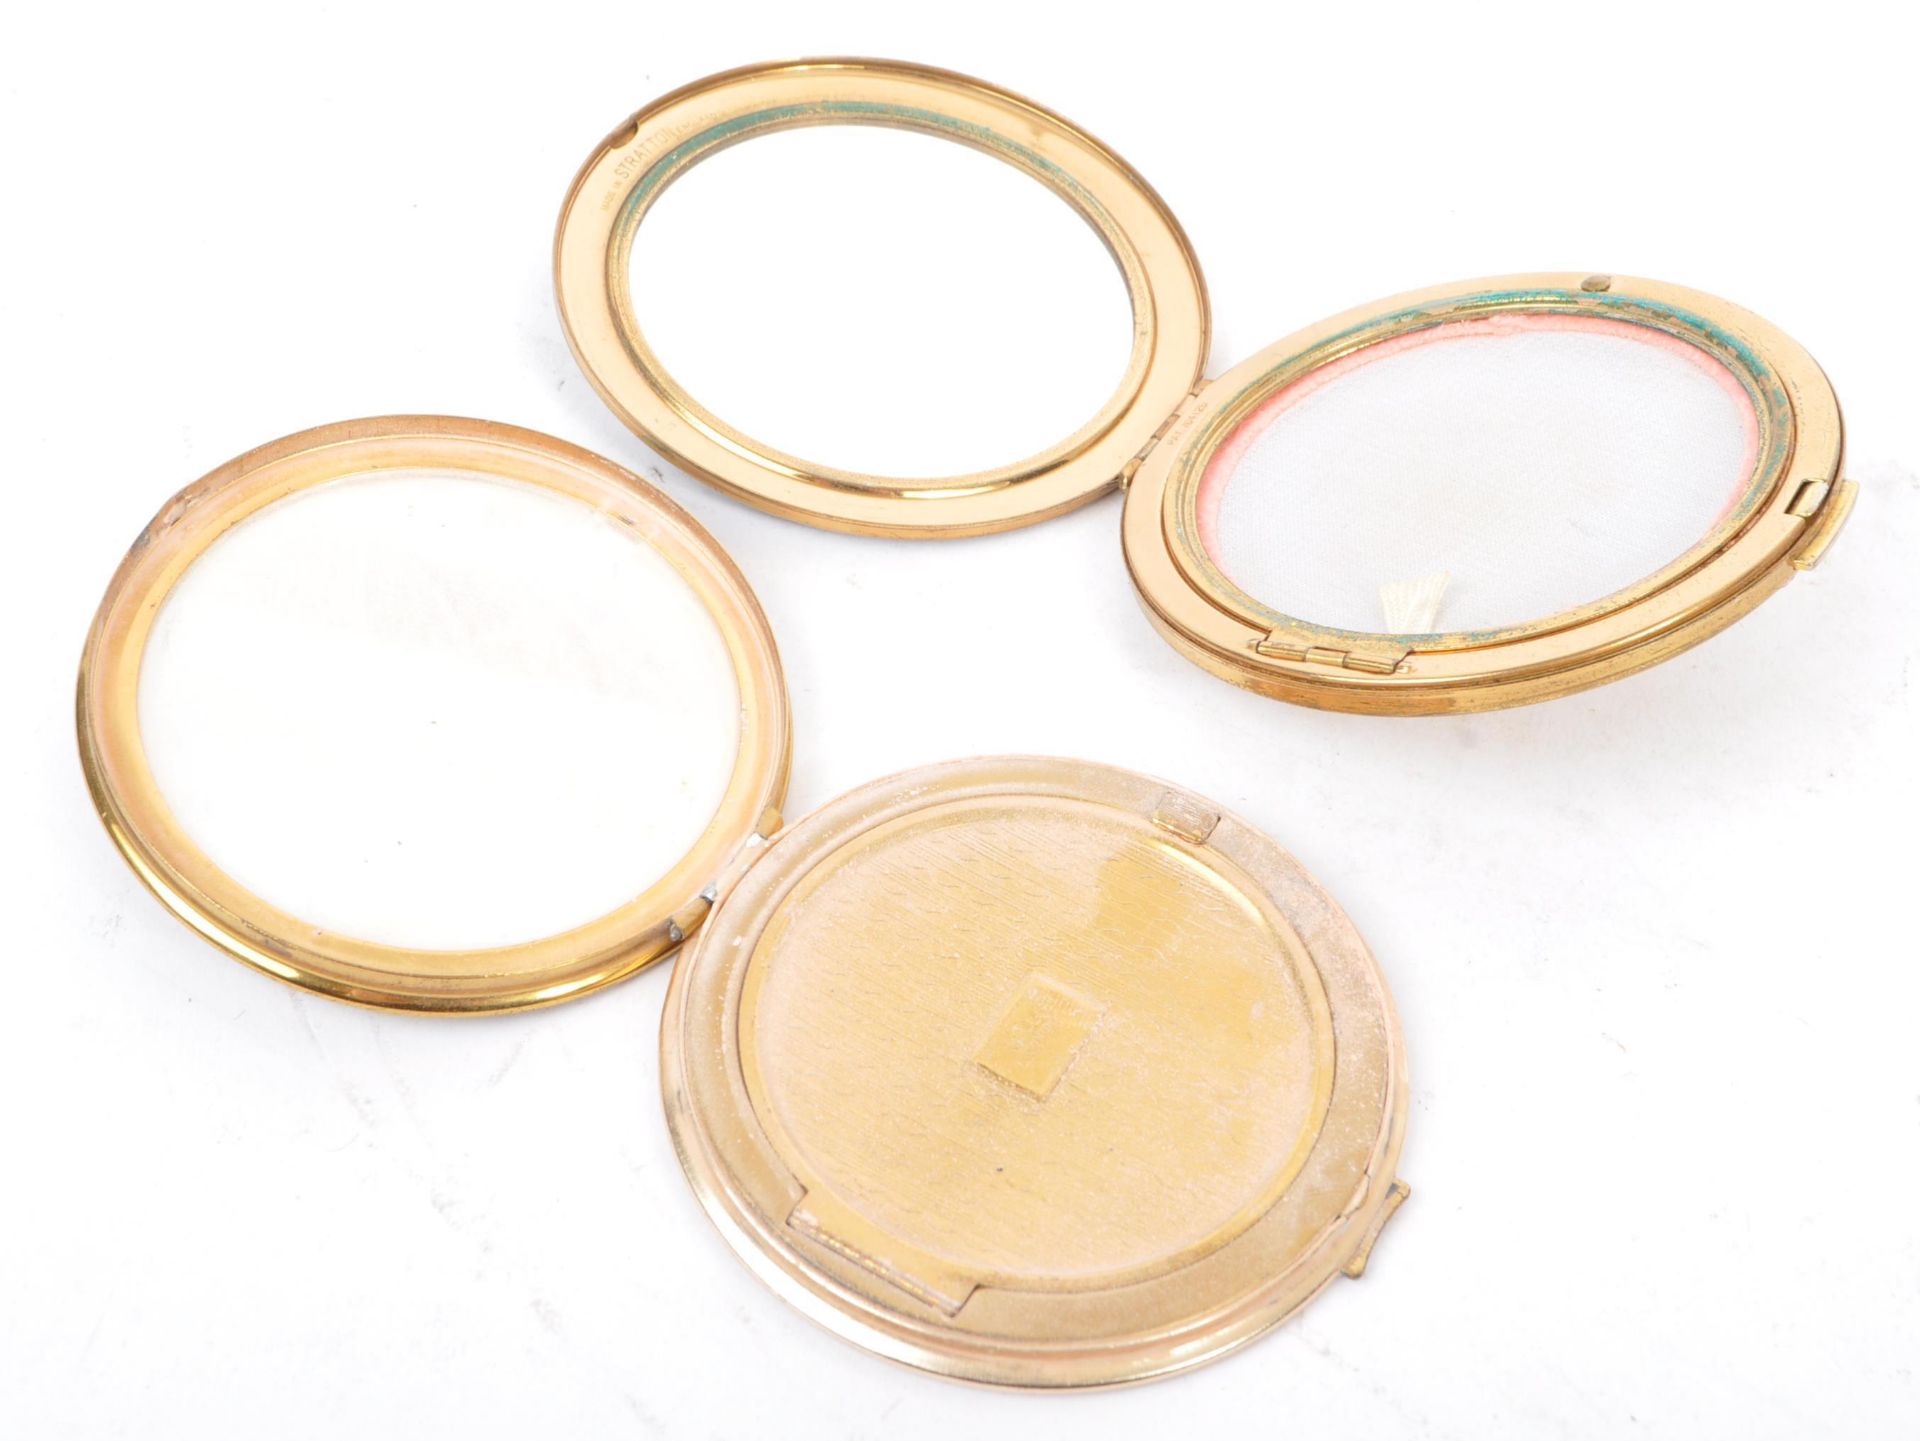 COLLECTION OF 20TH CENTURY VINTAGE VANITY COMPACTS - Image 3 of 10